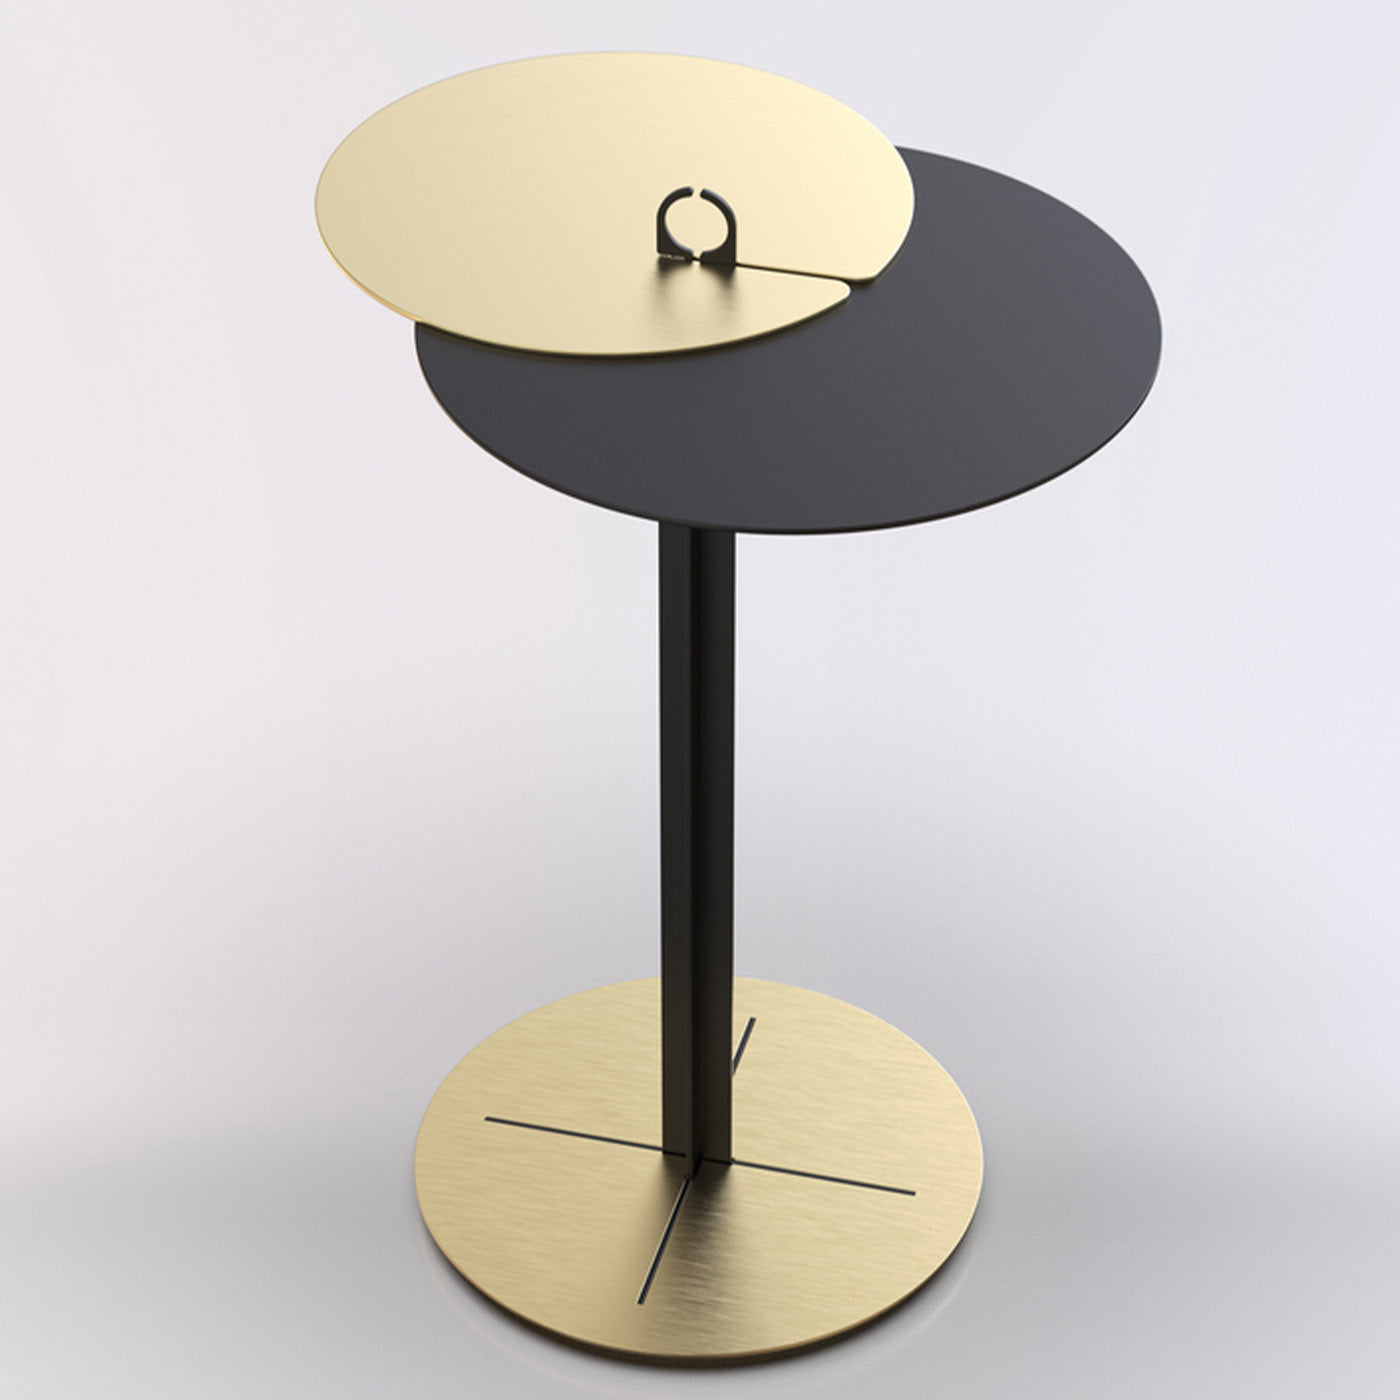 ED021 Black and Brass Side Table - Alternative view 1